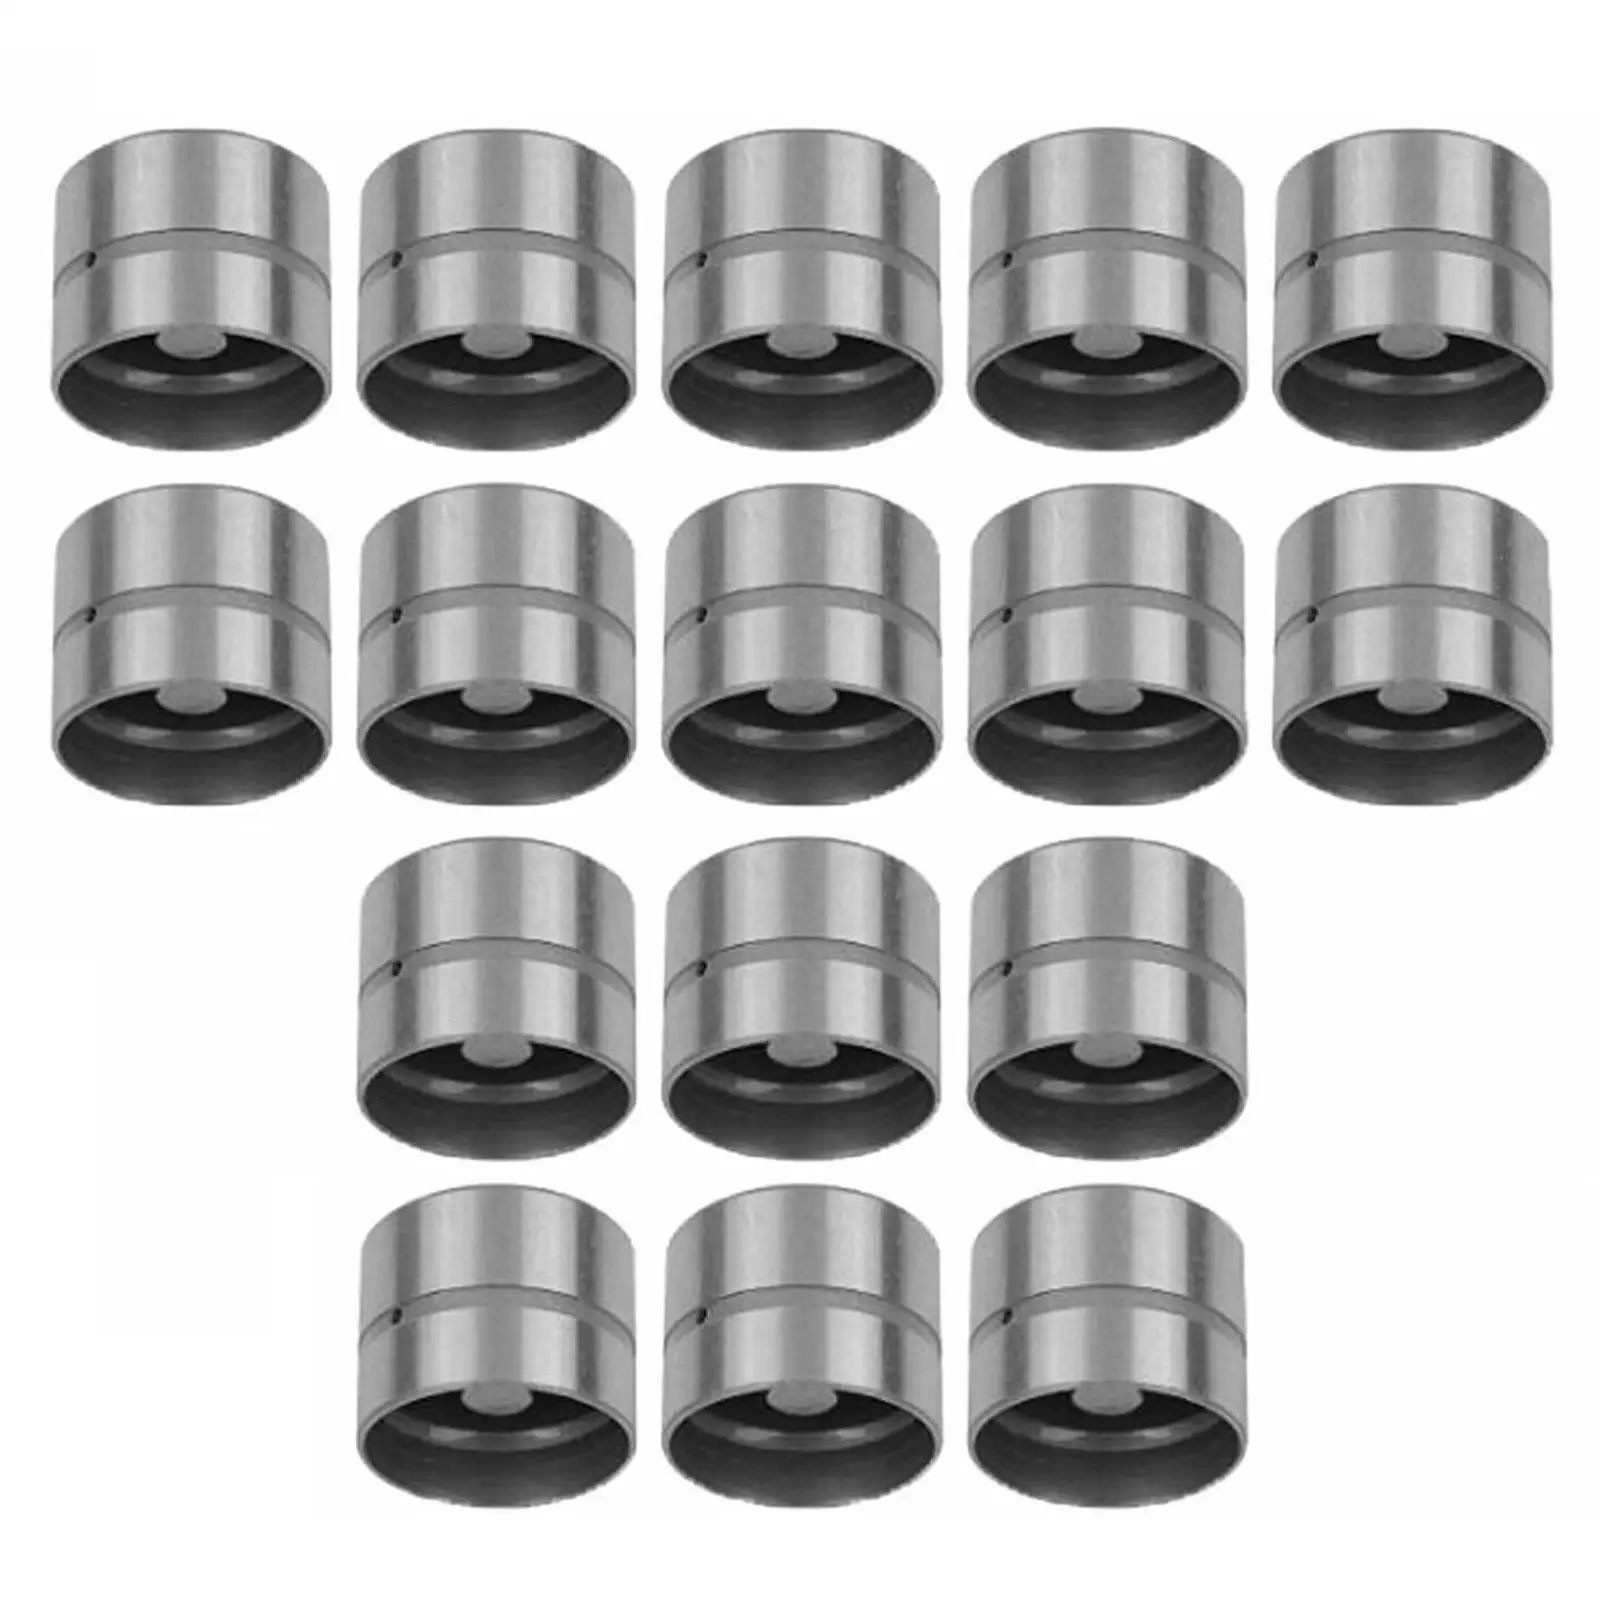 16Pcs Hydraulic Lifters Tappets Fit for 20XE C20XE C20Let x20Xev 420011810